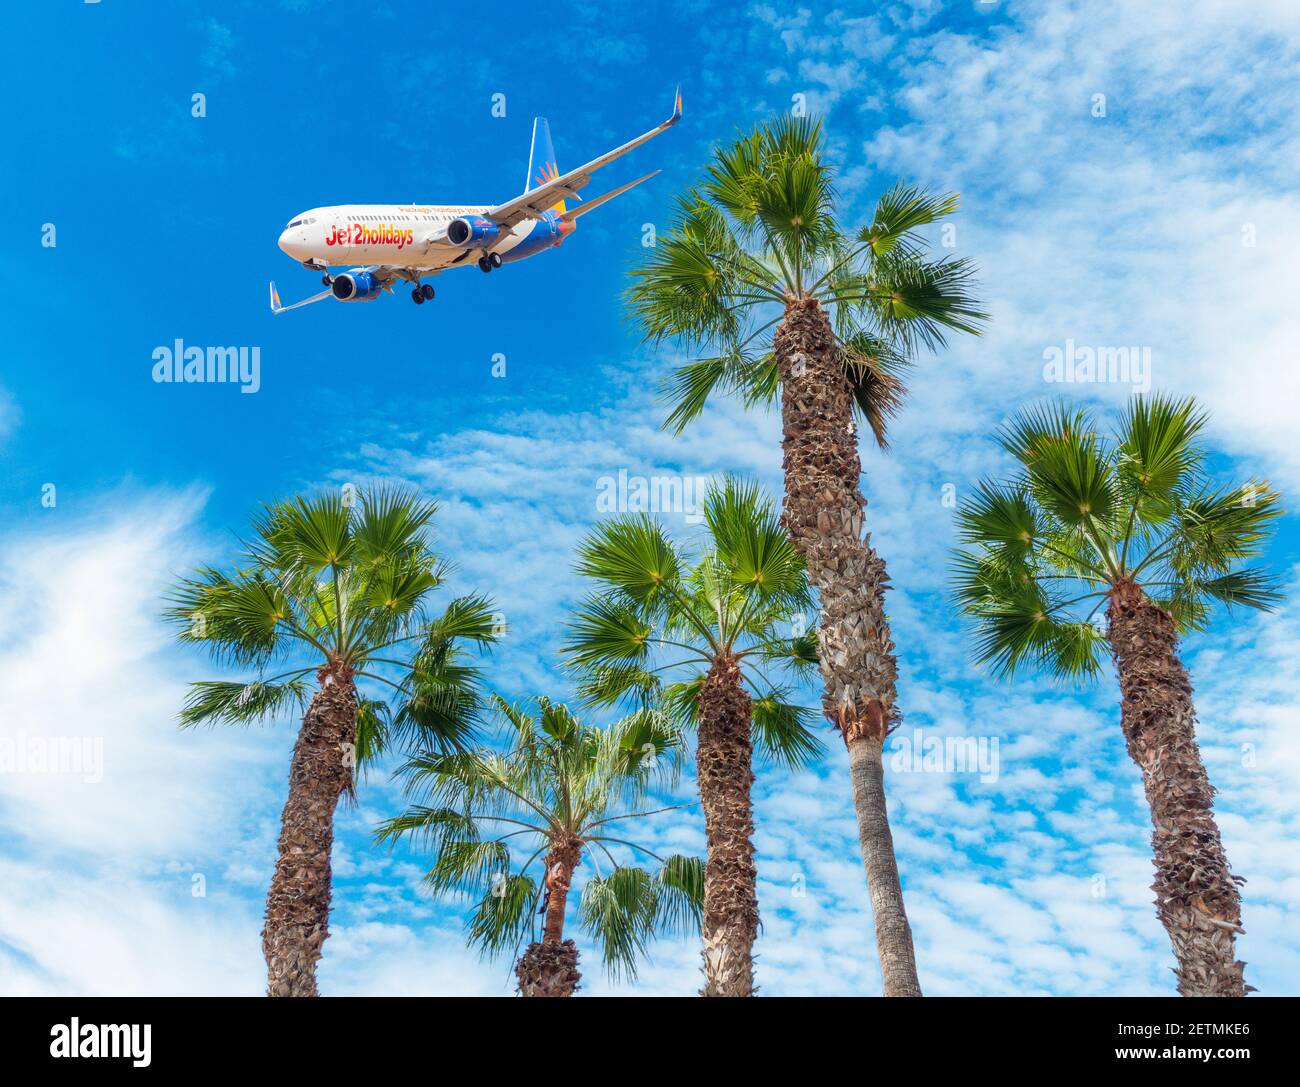 Jet2 plane aircraft, airplane flying over palm trees in Spain Stock Photo